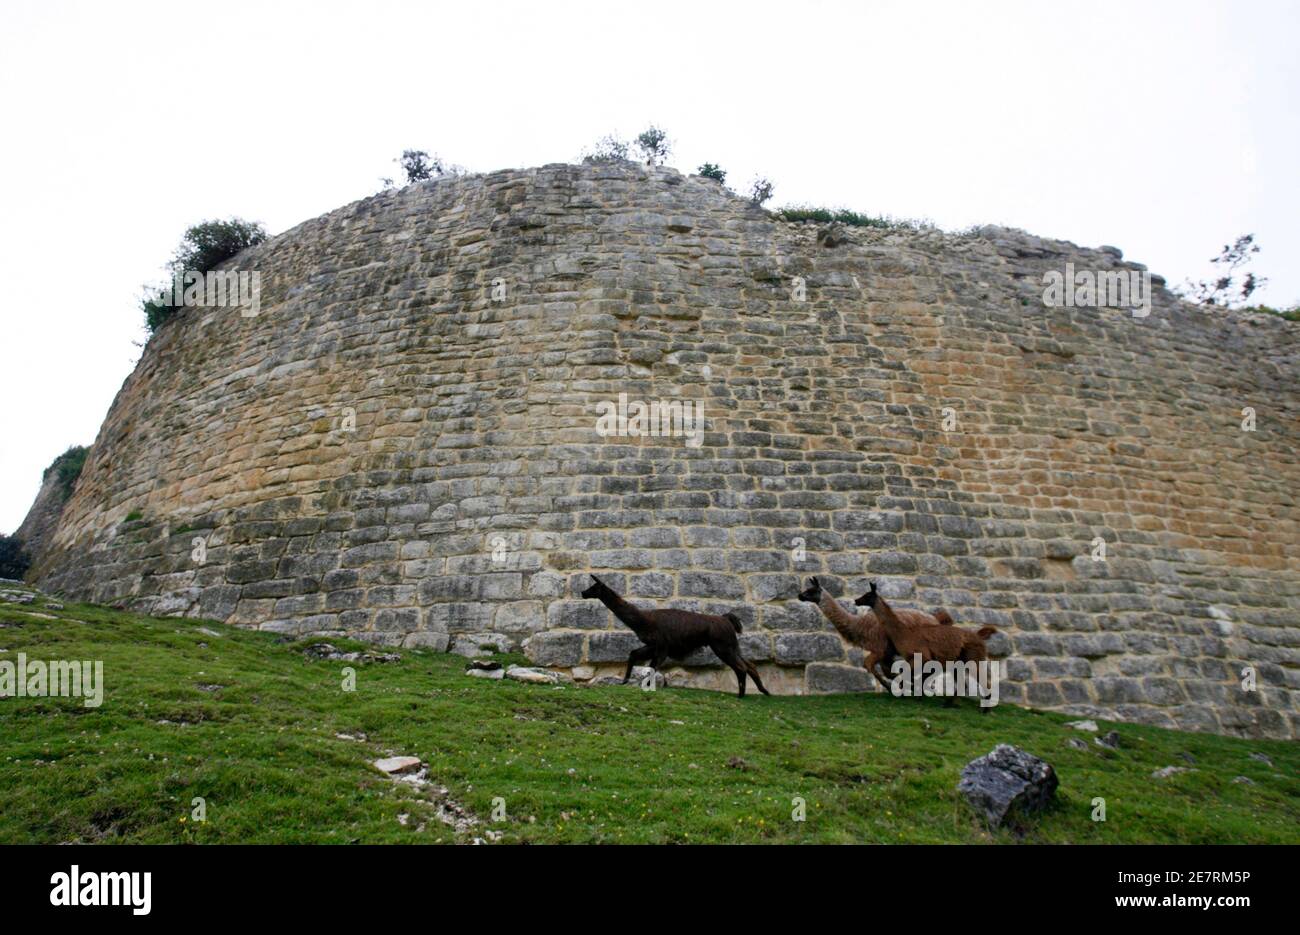 Llamas walk near a wall of the Kuelap Fortress, 3000 meters (9840 feet)  above sea level, in the Andean region of Chachapollas March 16, 2007. The  archaeological site of Kuelap, constructed by